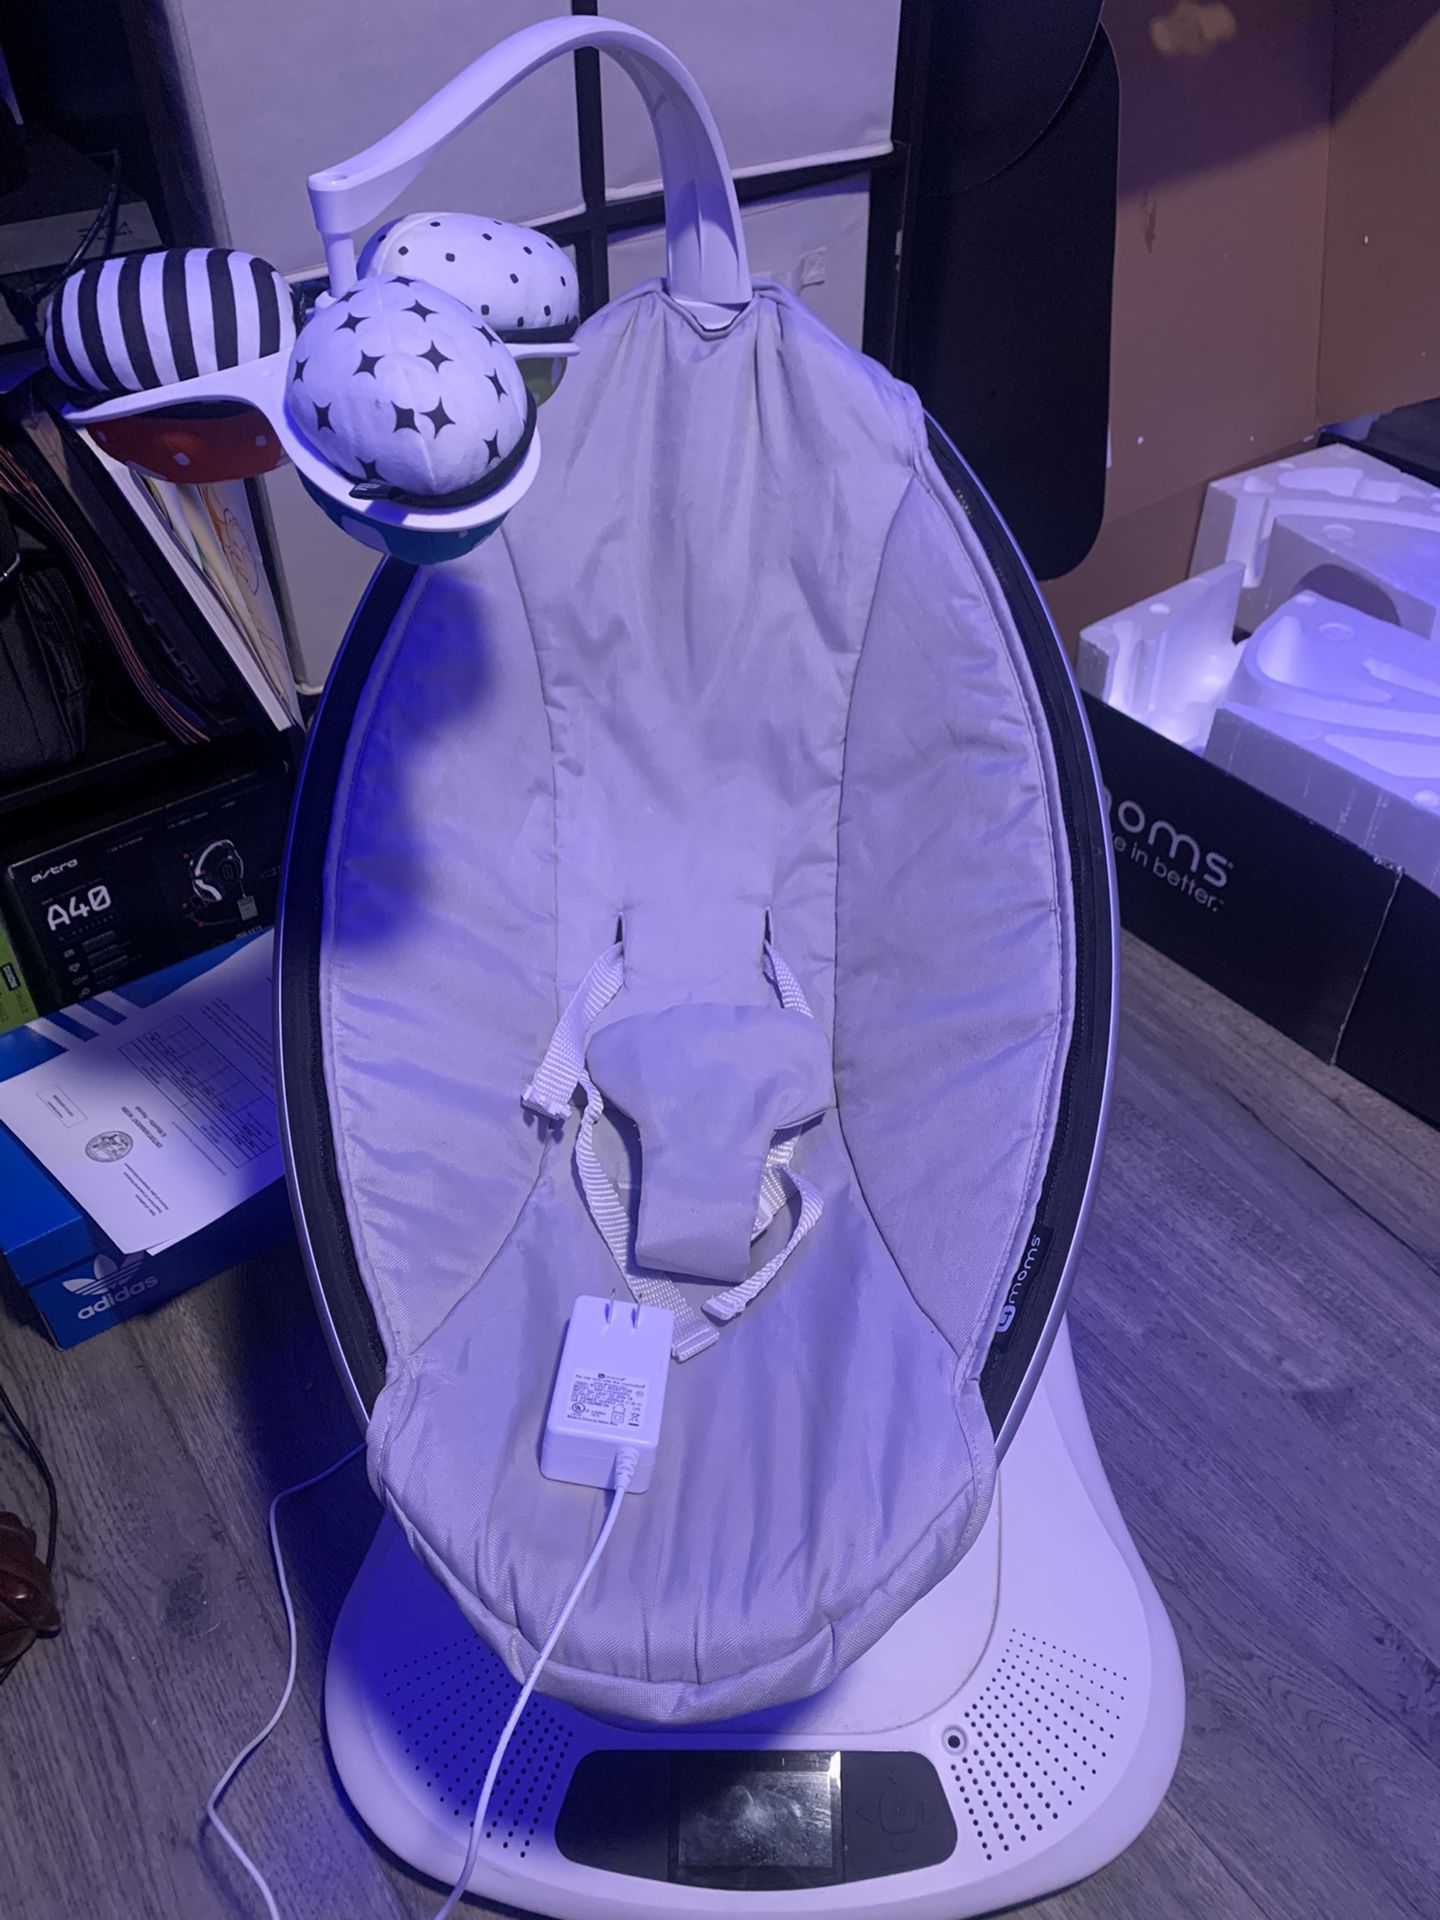 4Moms Mamaroo Swing (Everything included!)